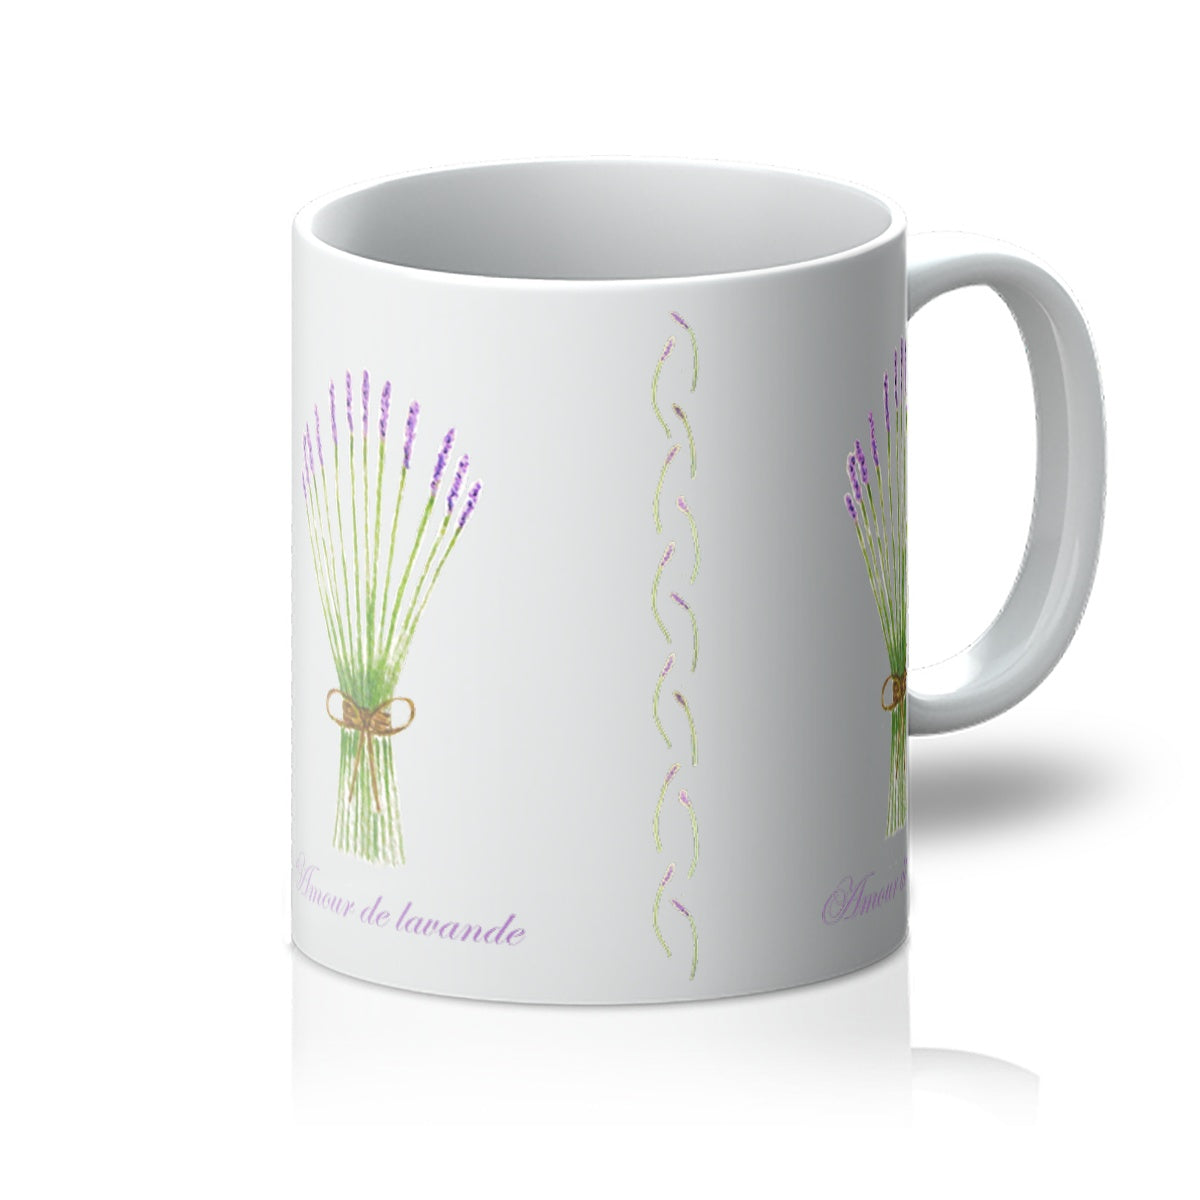 Mug, Cup, with bunch of Lavender flower and french writing reads love lavender